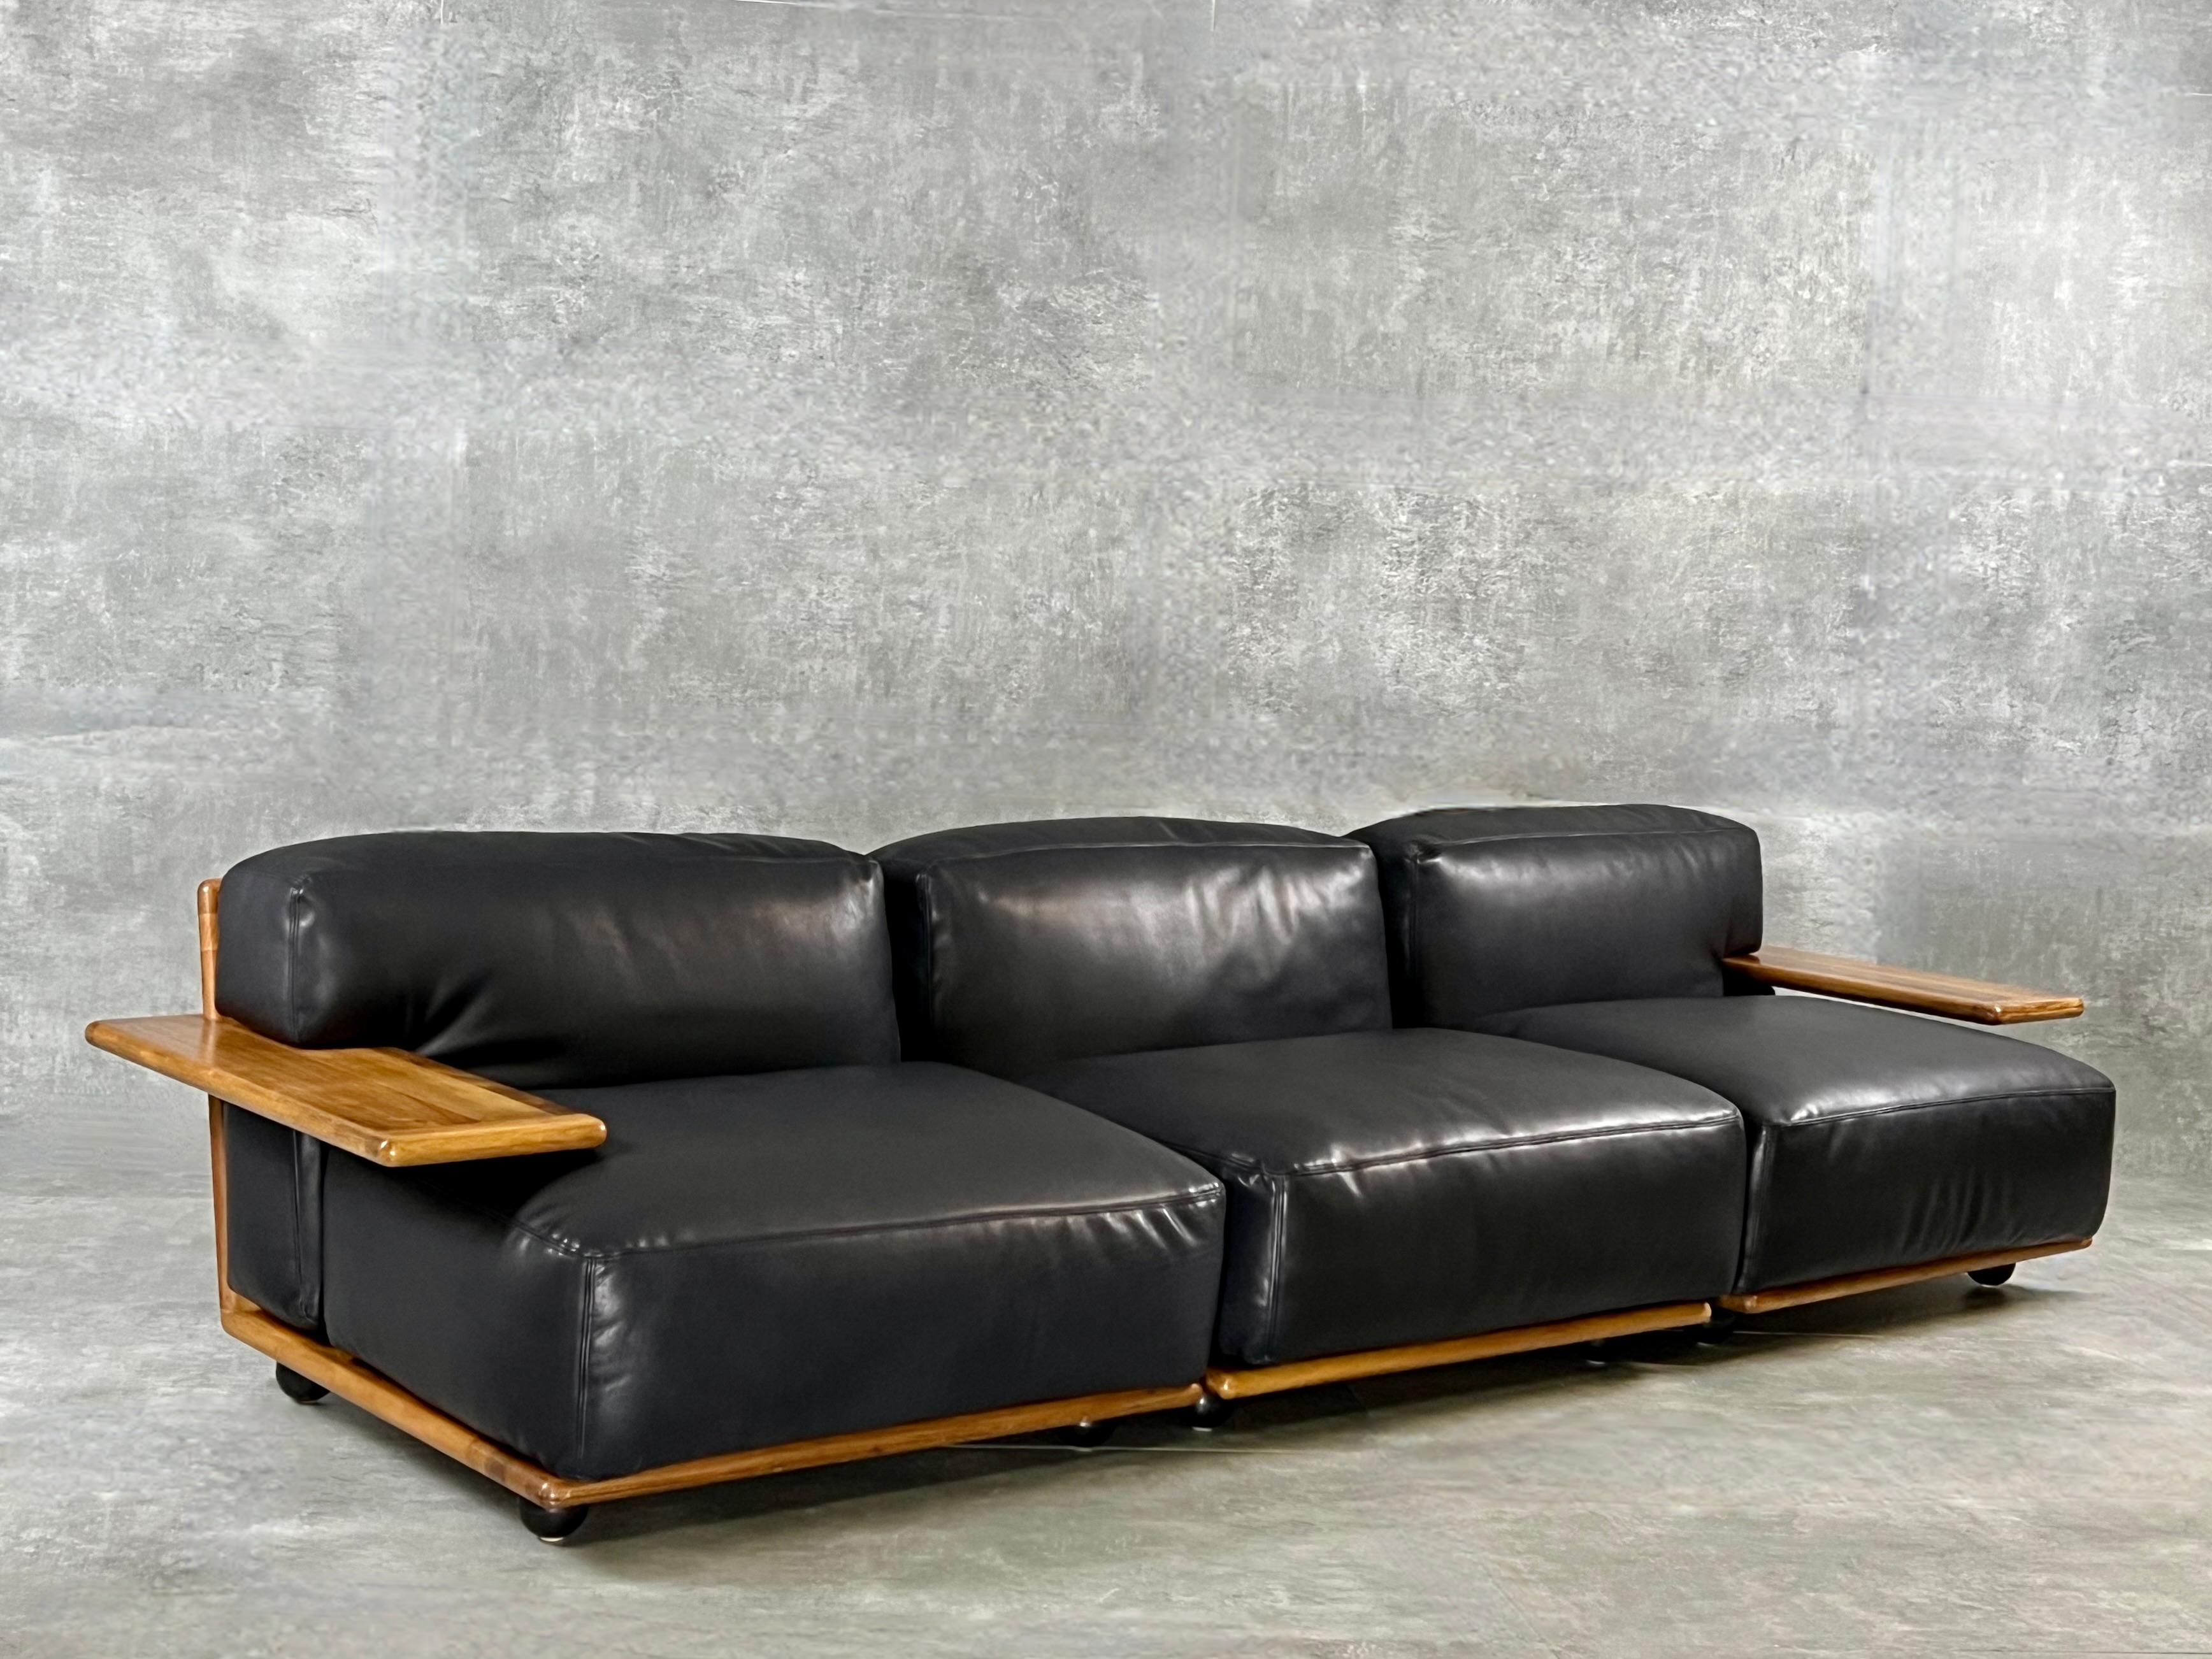 Stunning Pianura sectional seating group of three pieces. Walnut wooden structure with high comfort black leather cushions. Designed by Mario Bellini for Cassina in the 1970's.
The walnut has signs of use that matches the age and wear.  Still very